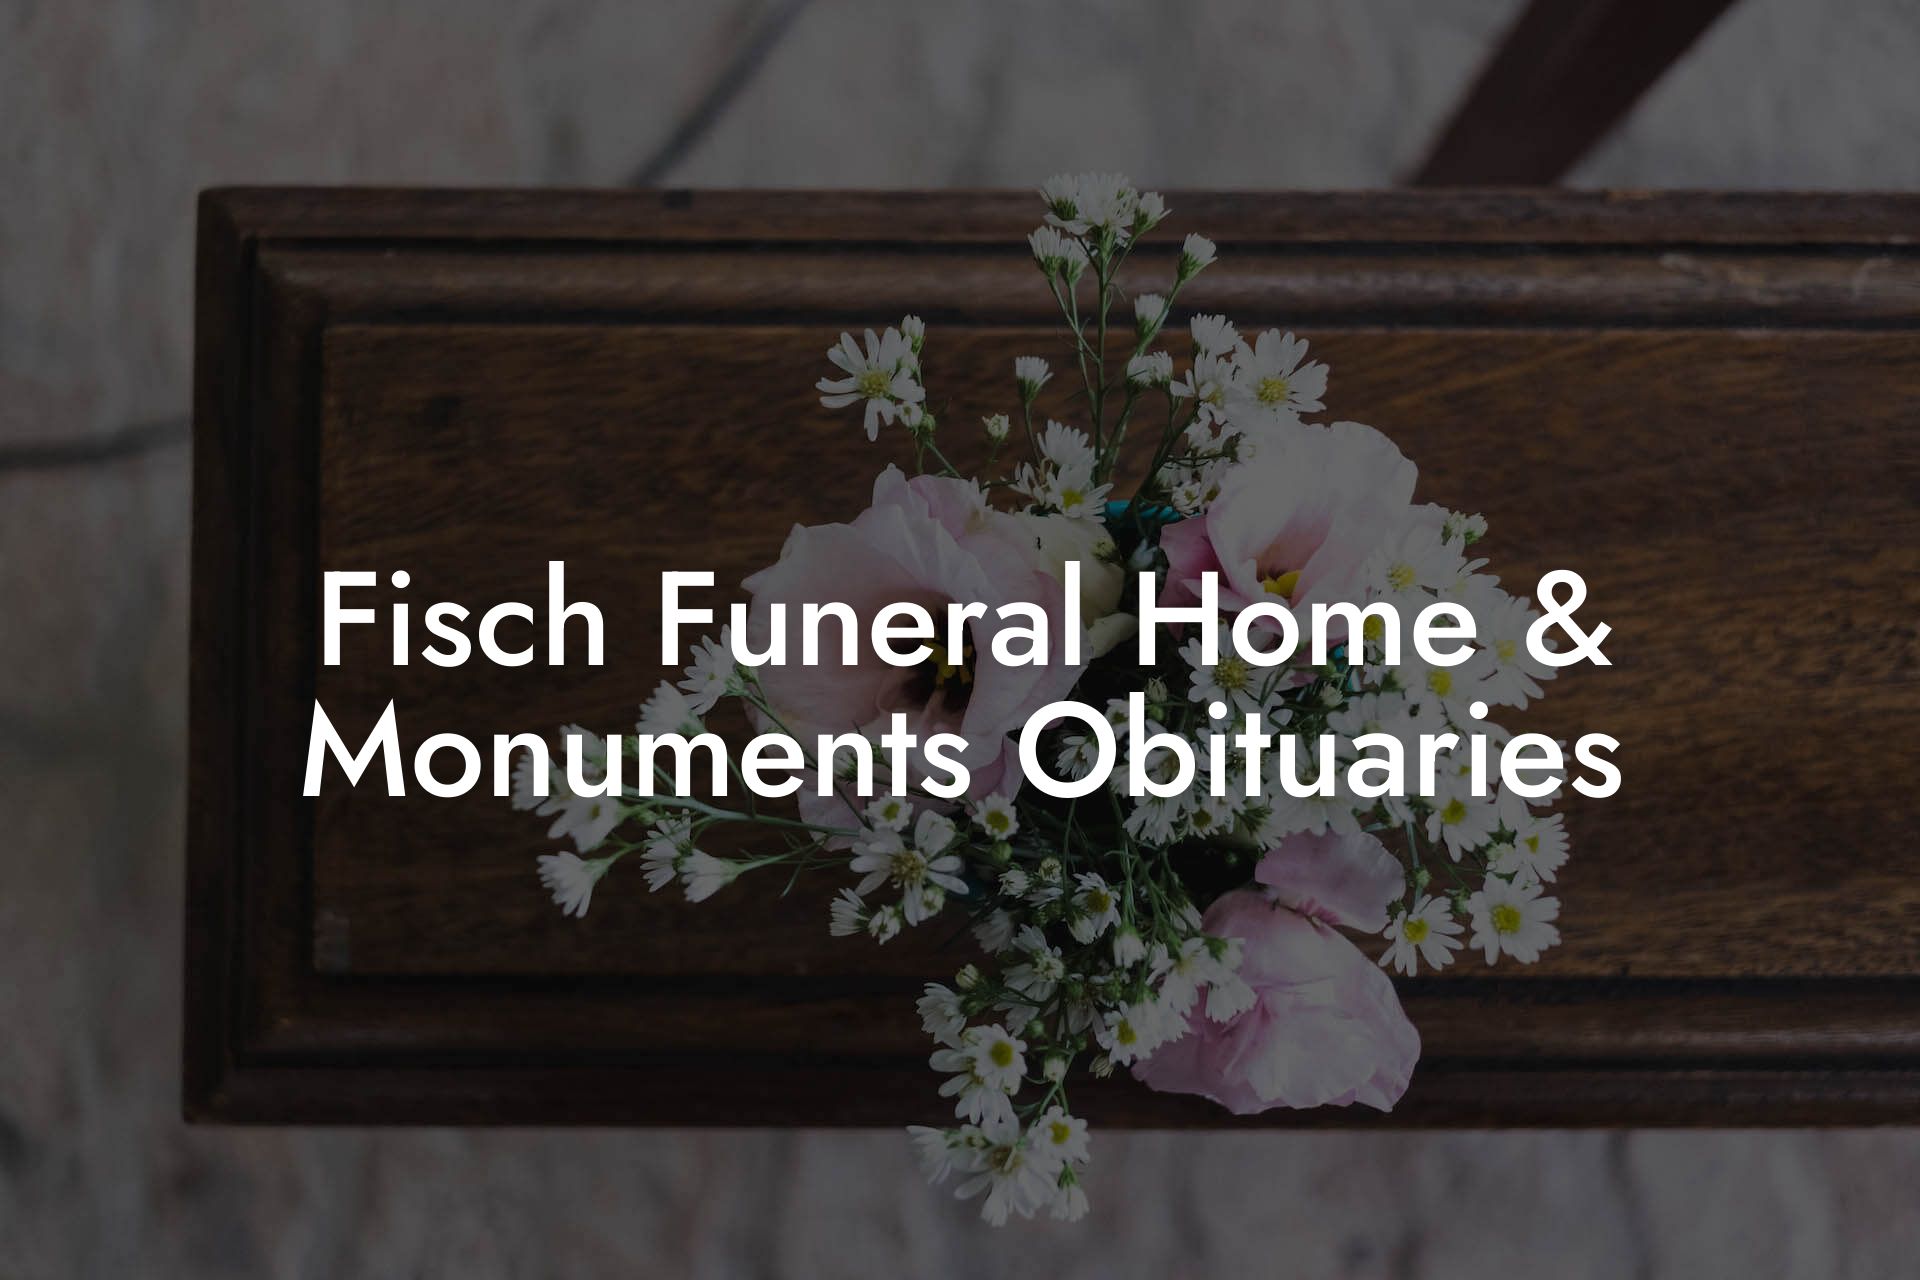 Fisch Funeral Home & Monuments Obituaries